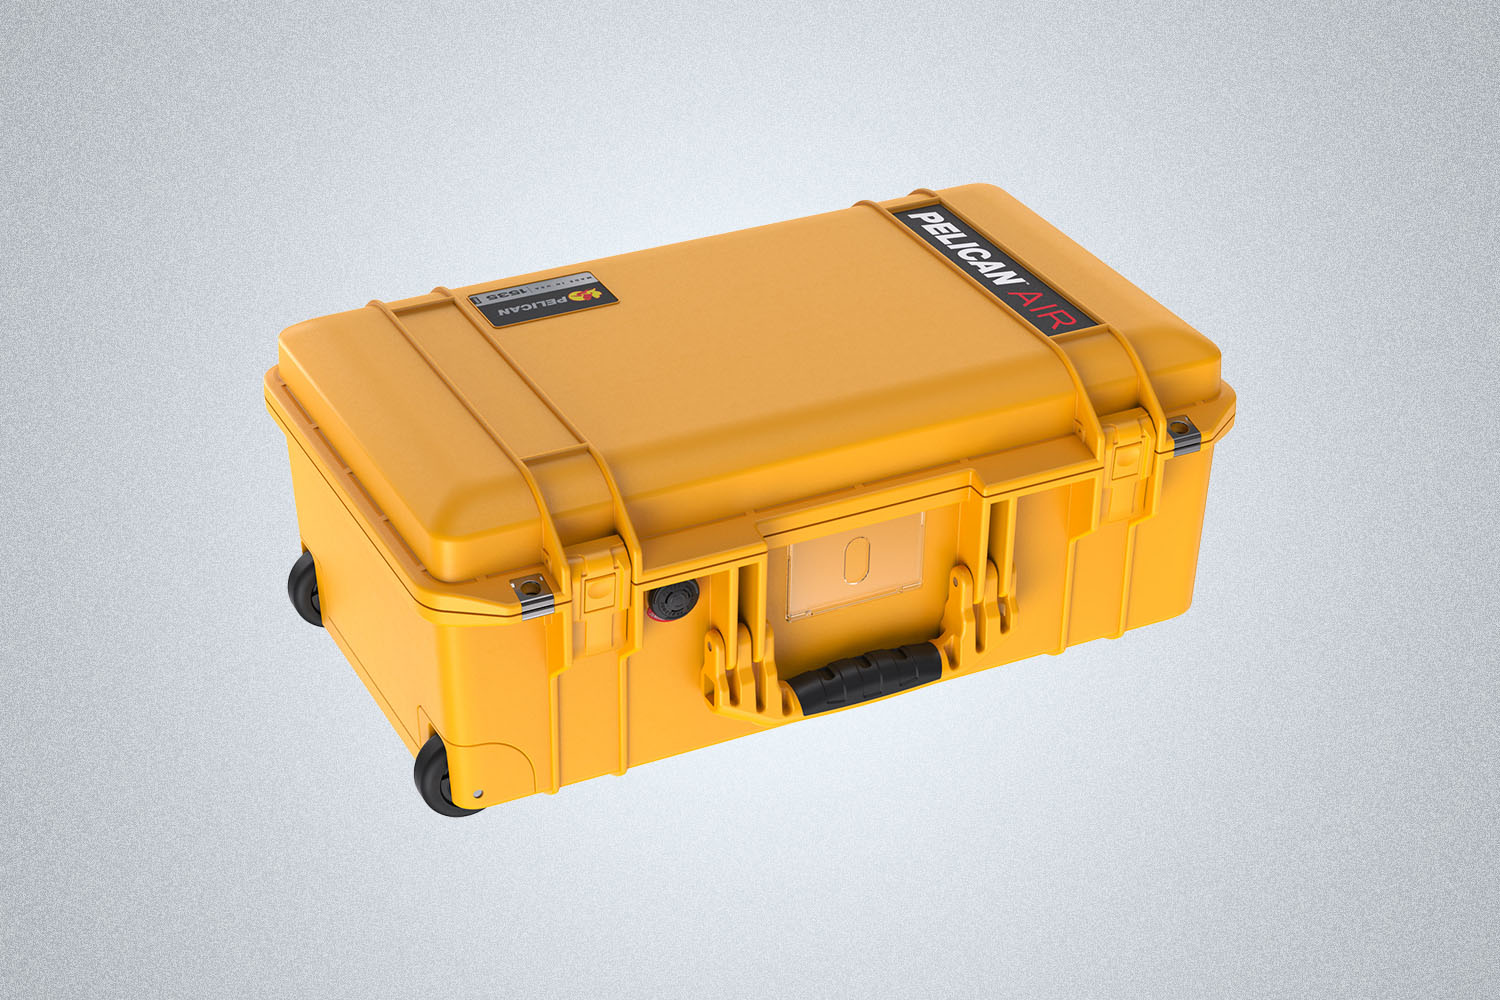 The Pelican 1535 Air Carry-On Case in yellow on a gray background